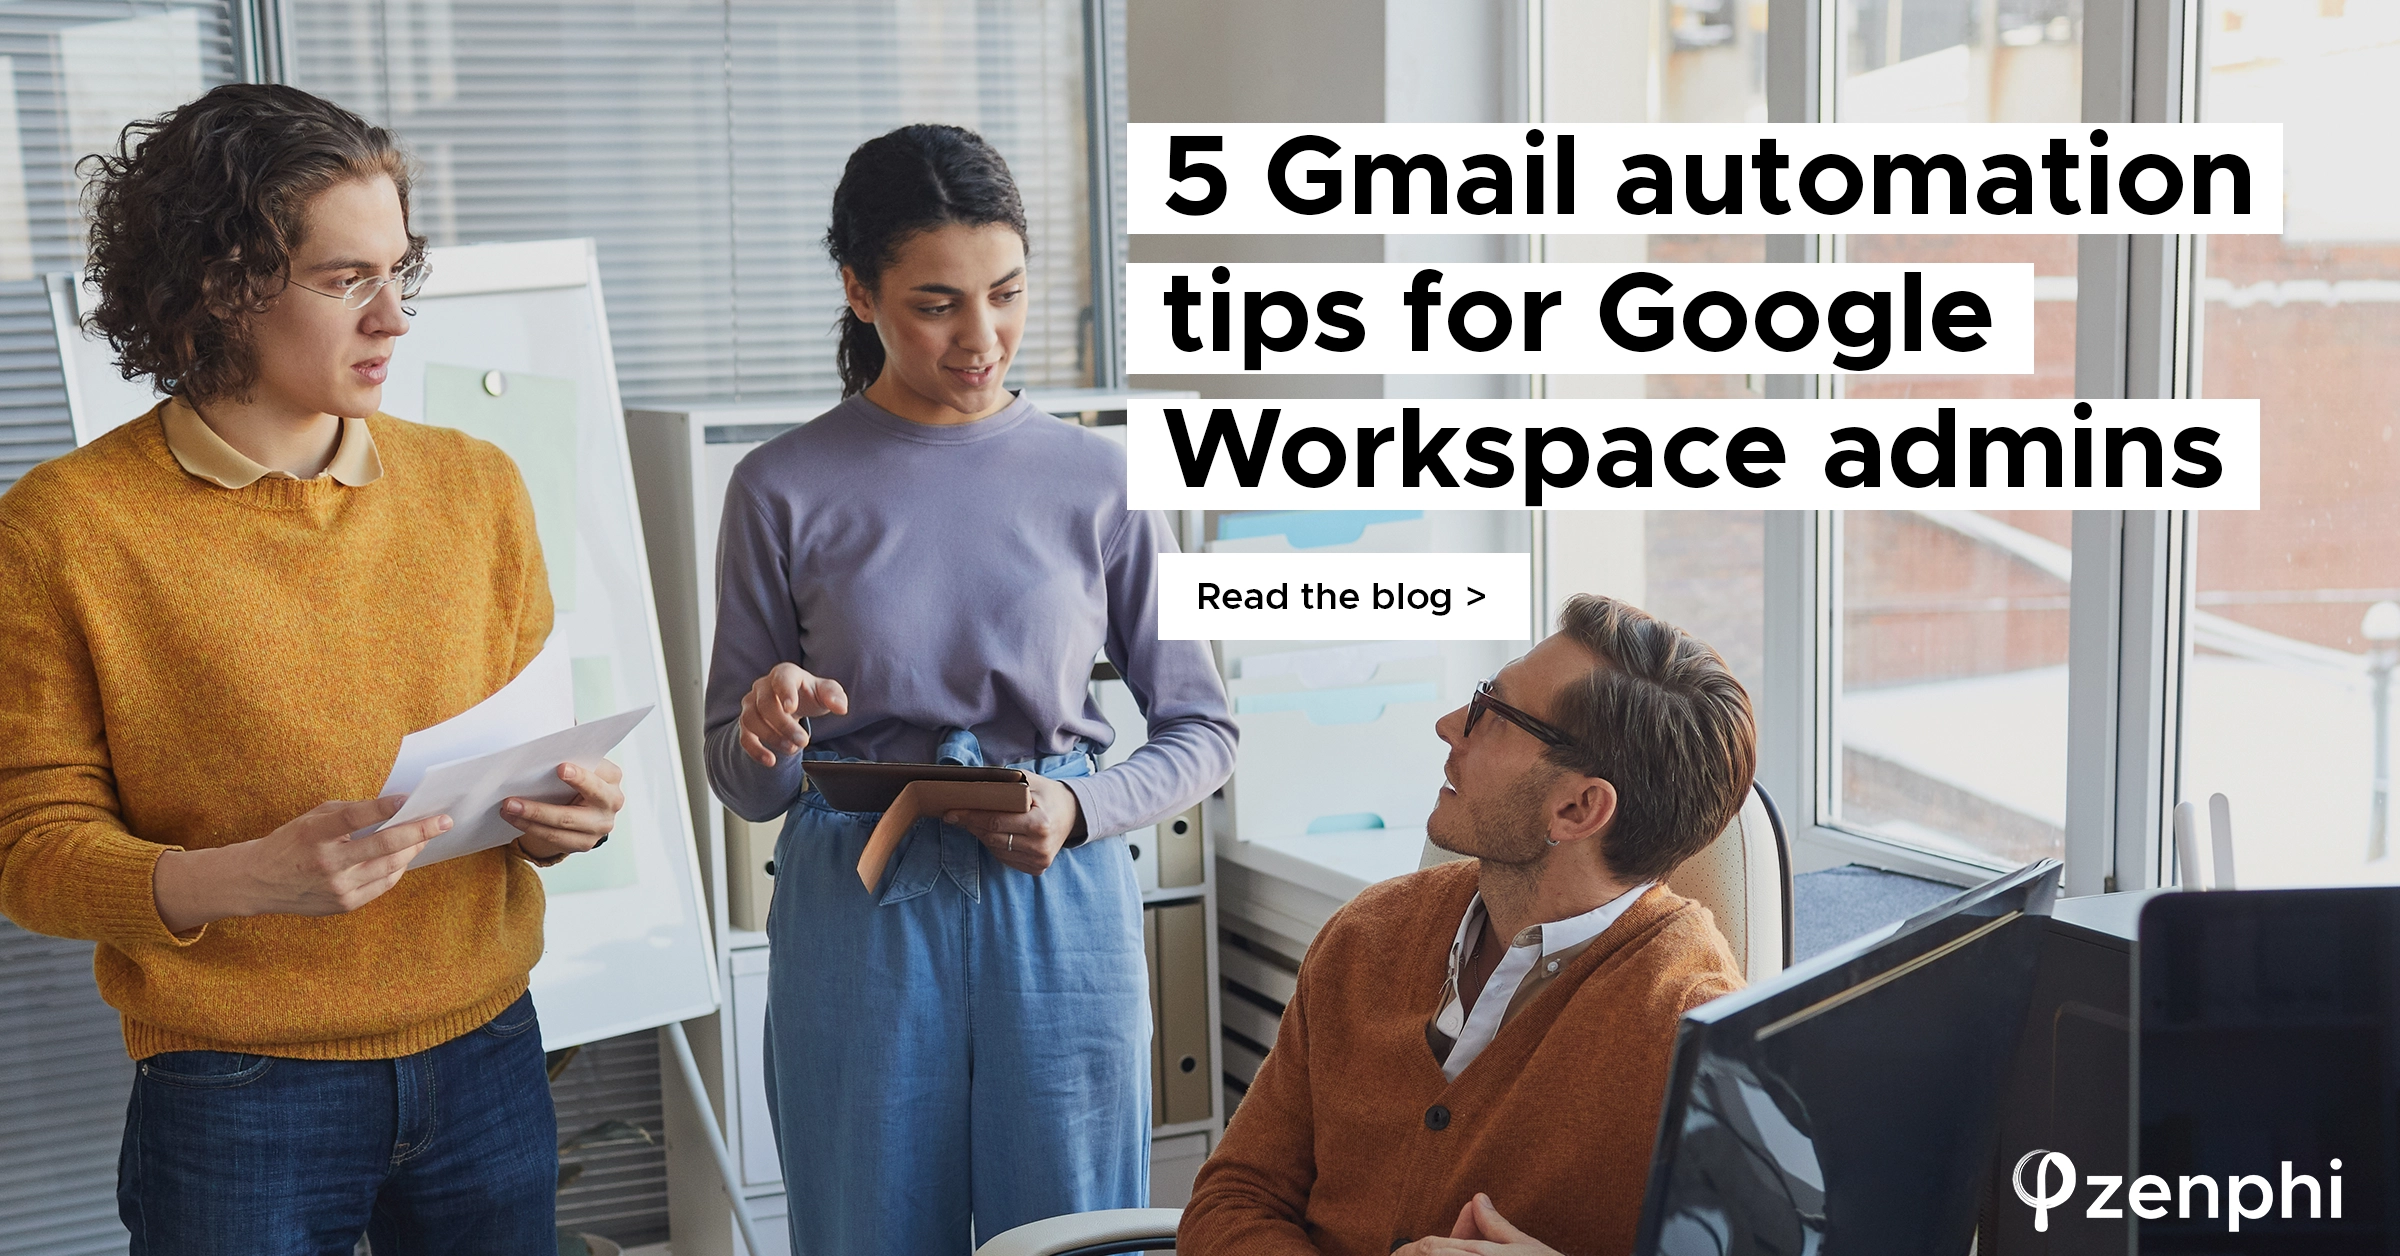 Gmail Automation Tips for Google Workspace Admins